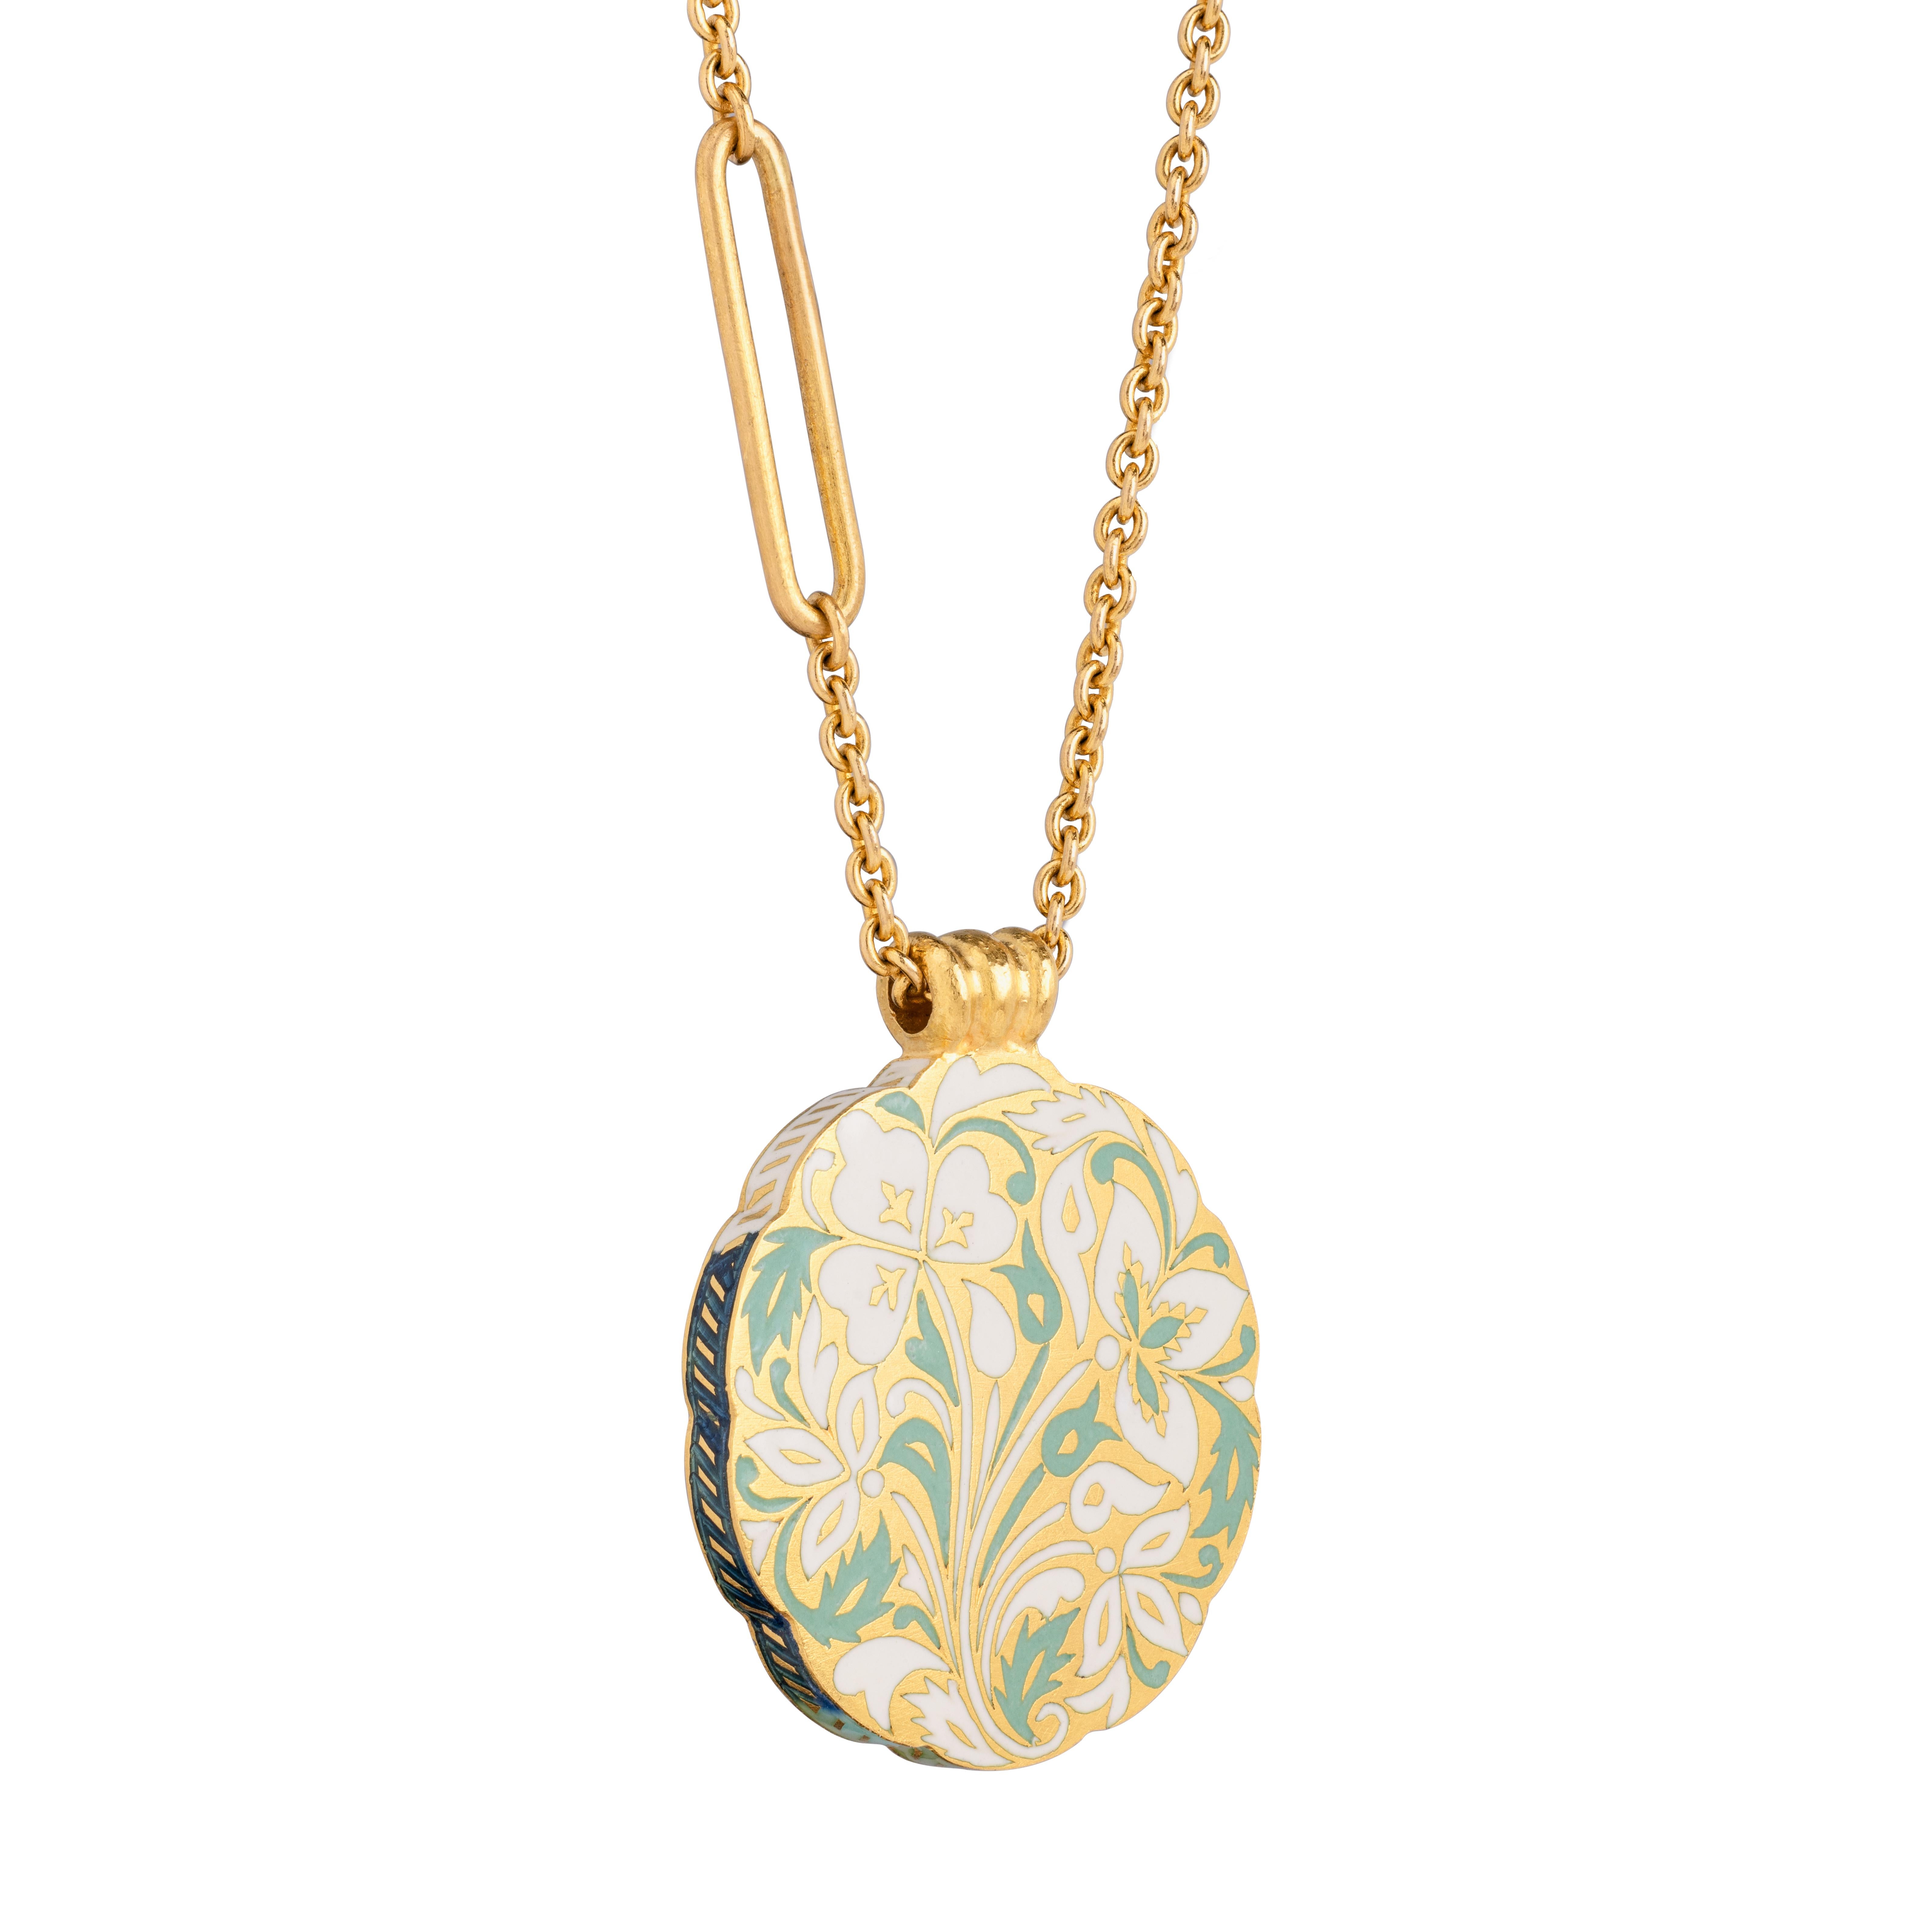 22K Gold and Blue and Green Floral Enamel Pendant Necklace Handmade by Agaro In New Condition For Sale In New York, NY